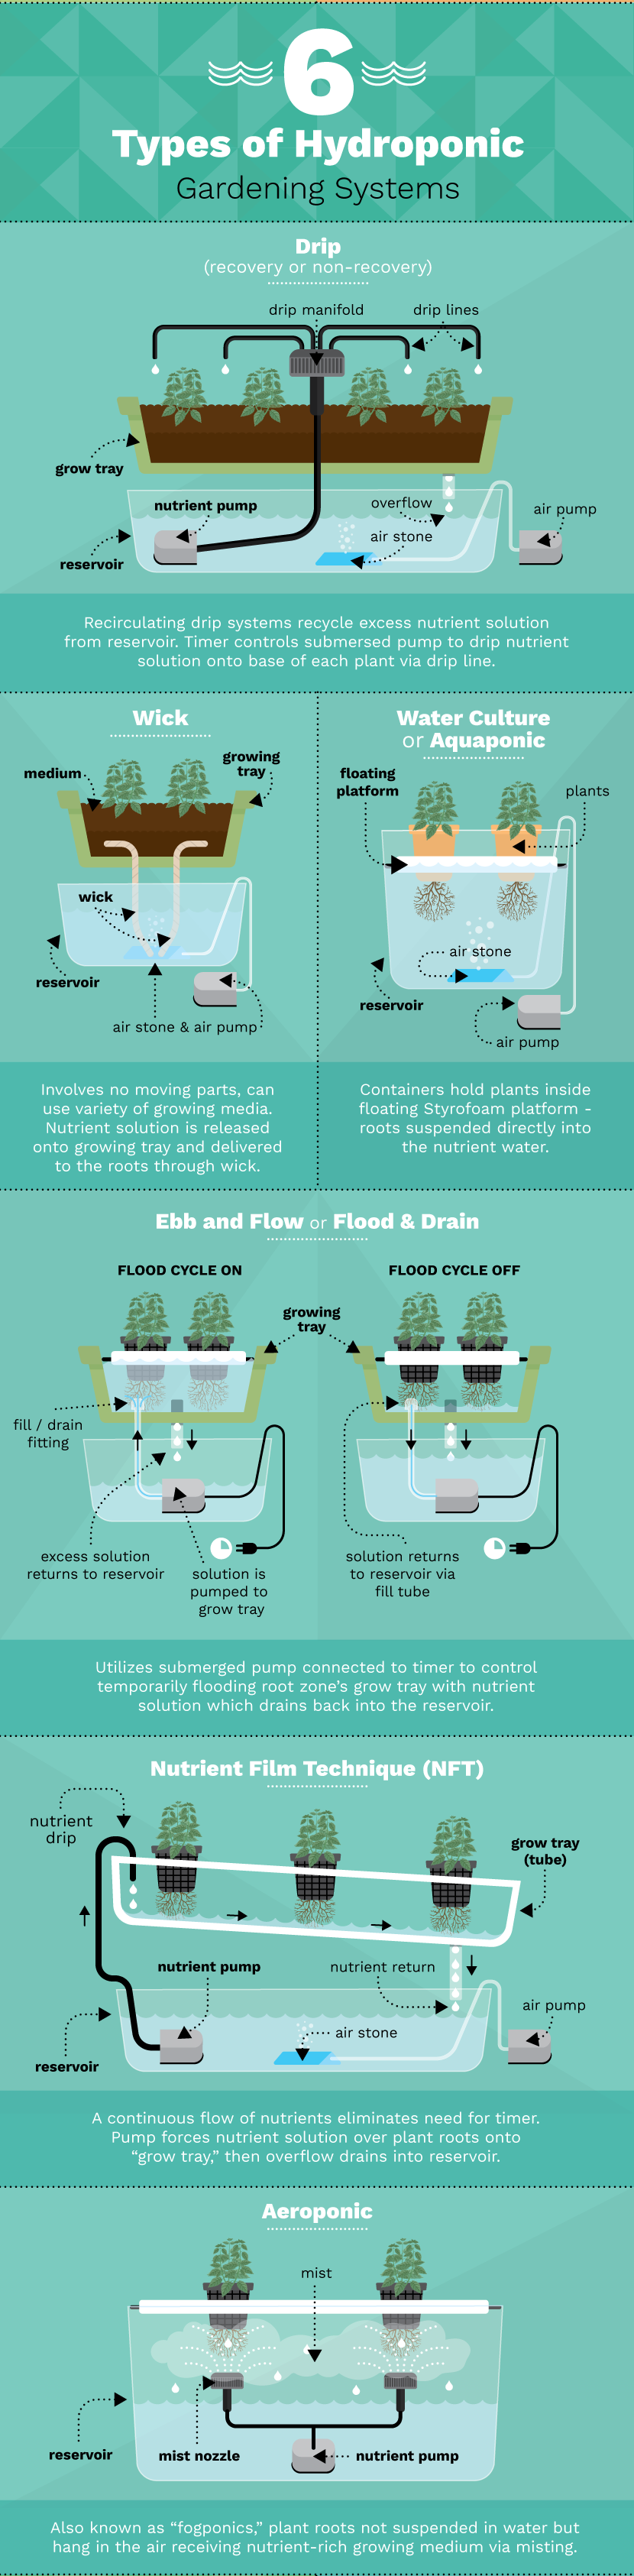 Six types of hydroponic gardening systems